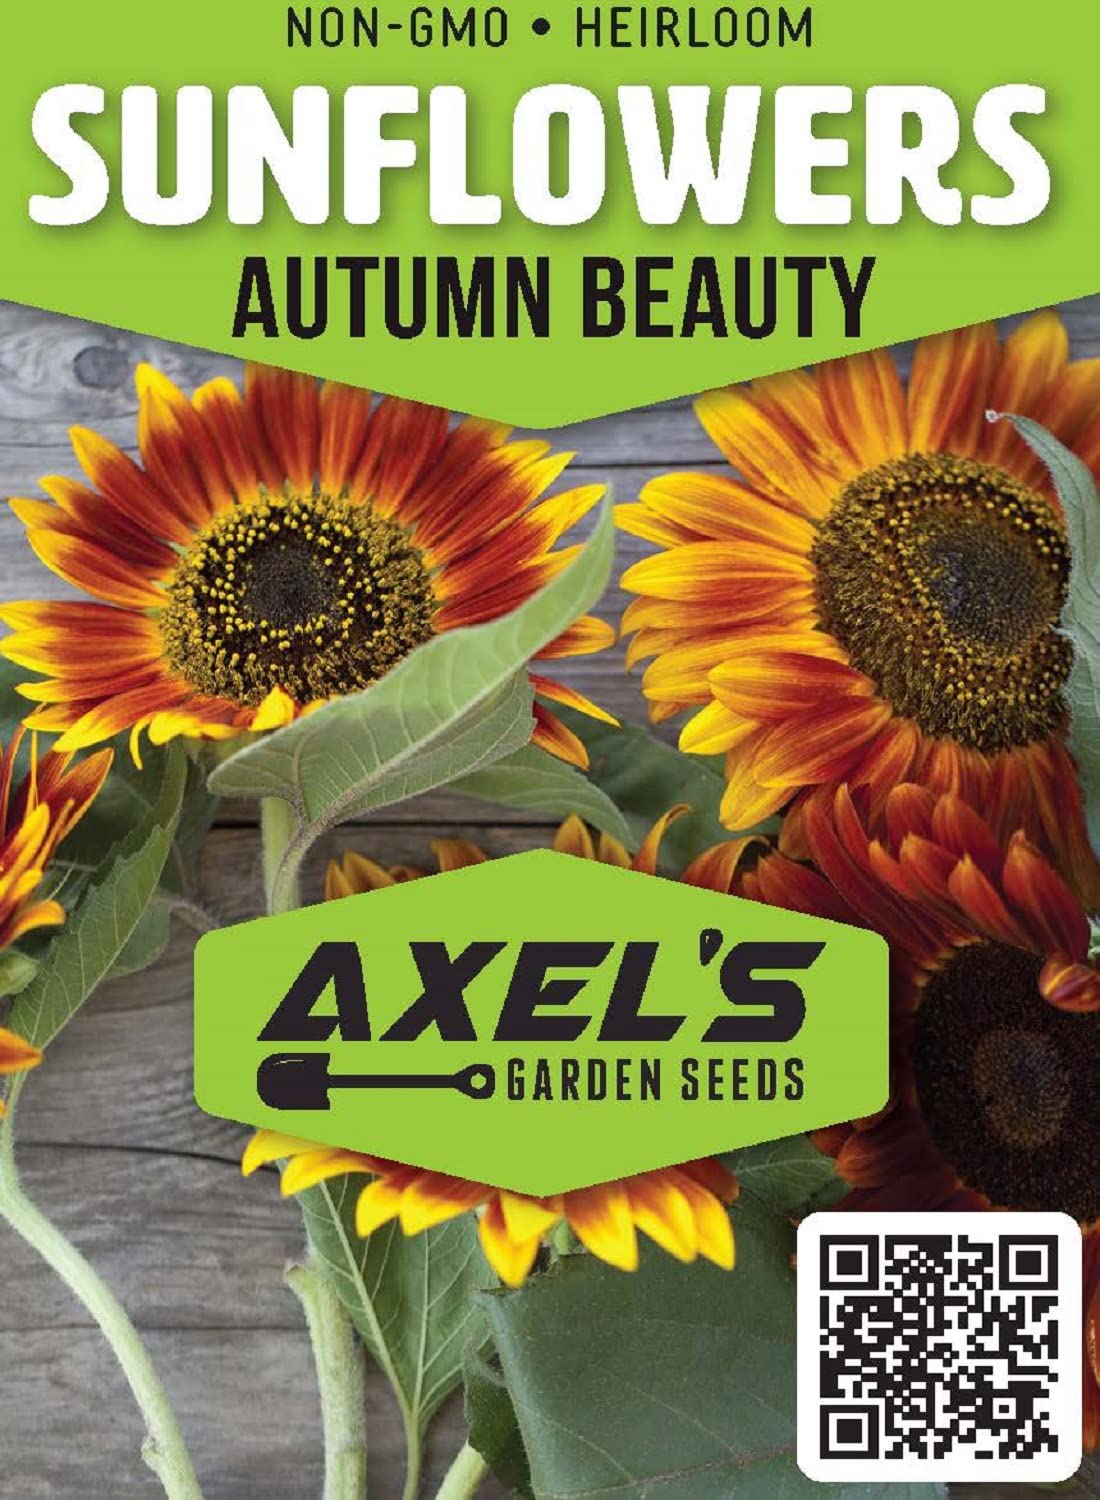 Sunflower Seeds for Planting - Plant & Grow Autumn Beauty Sunflower Mix in Your Home Outdoor Garden - 25 Non GMO Heirloom Seeds - Full Planting Packet with Instructions, 1 Packet